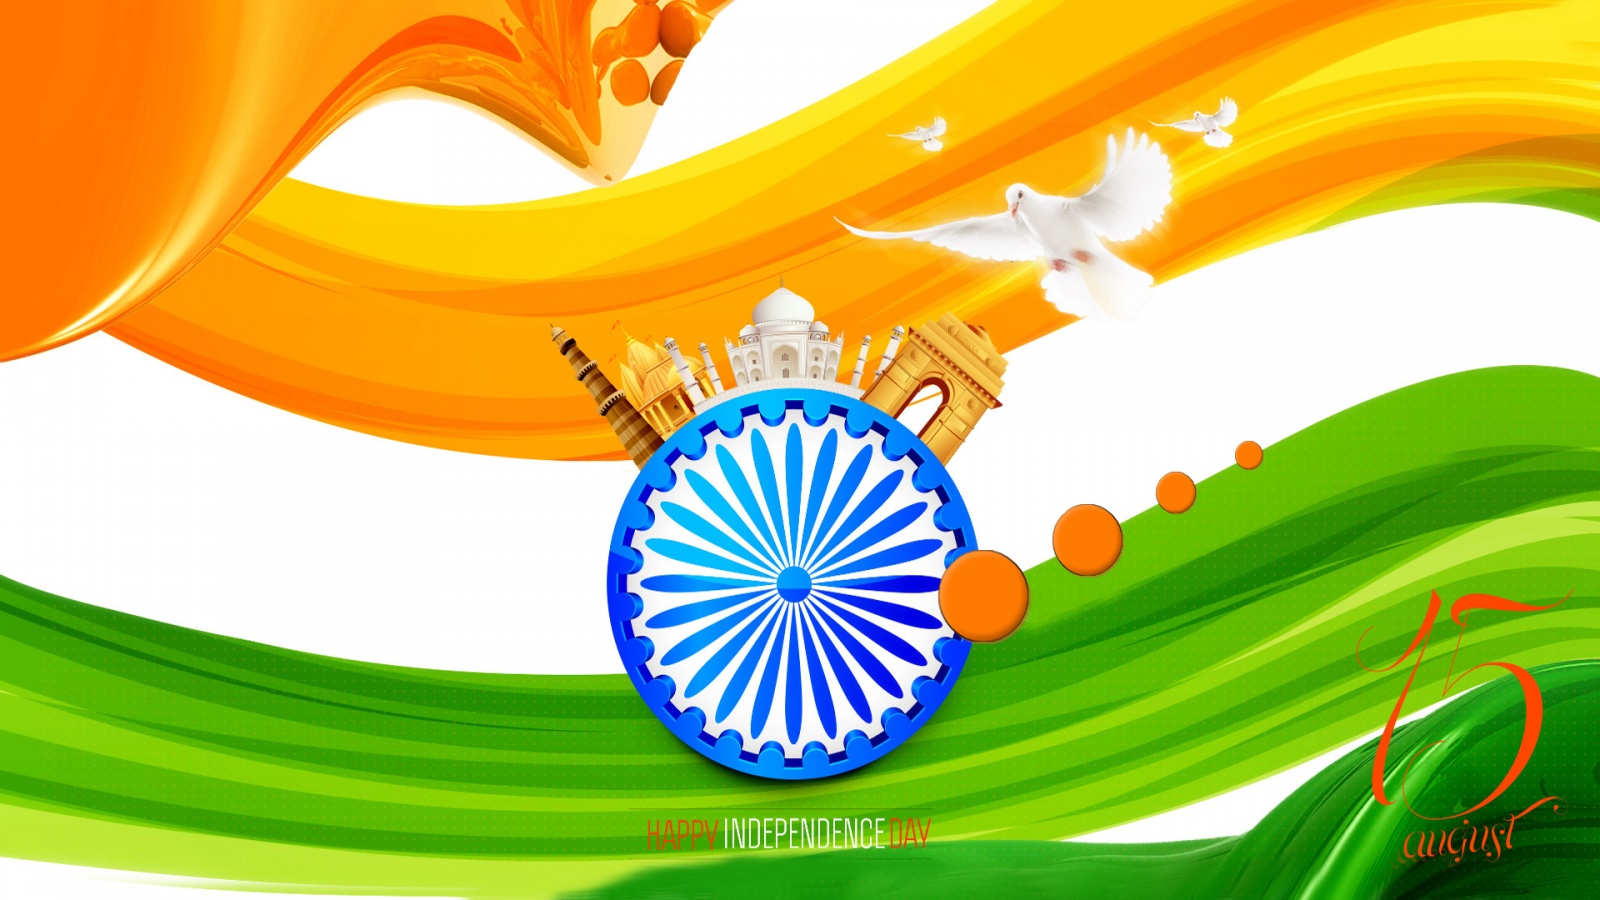 india independence day - photo #10